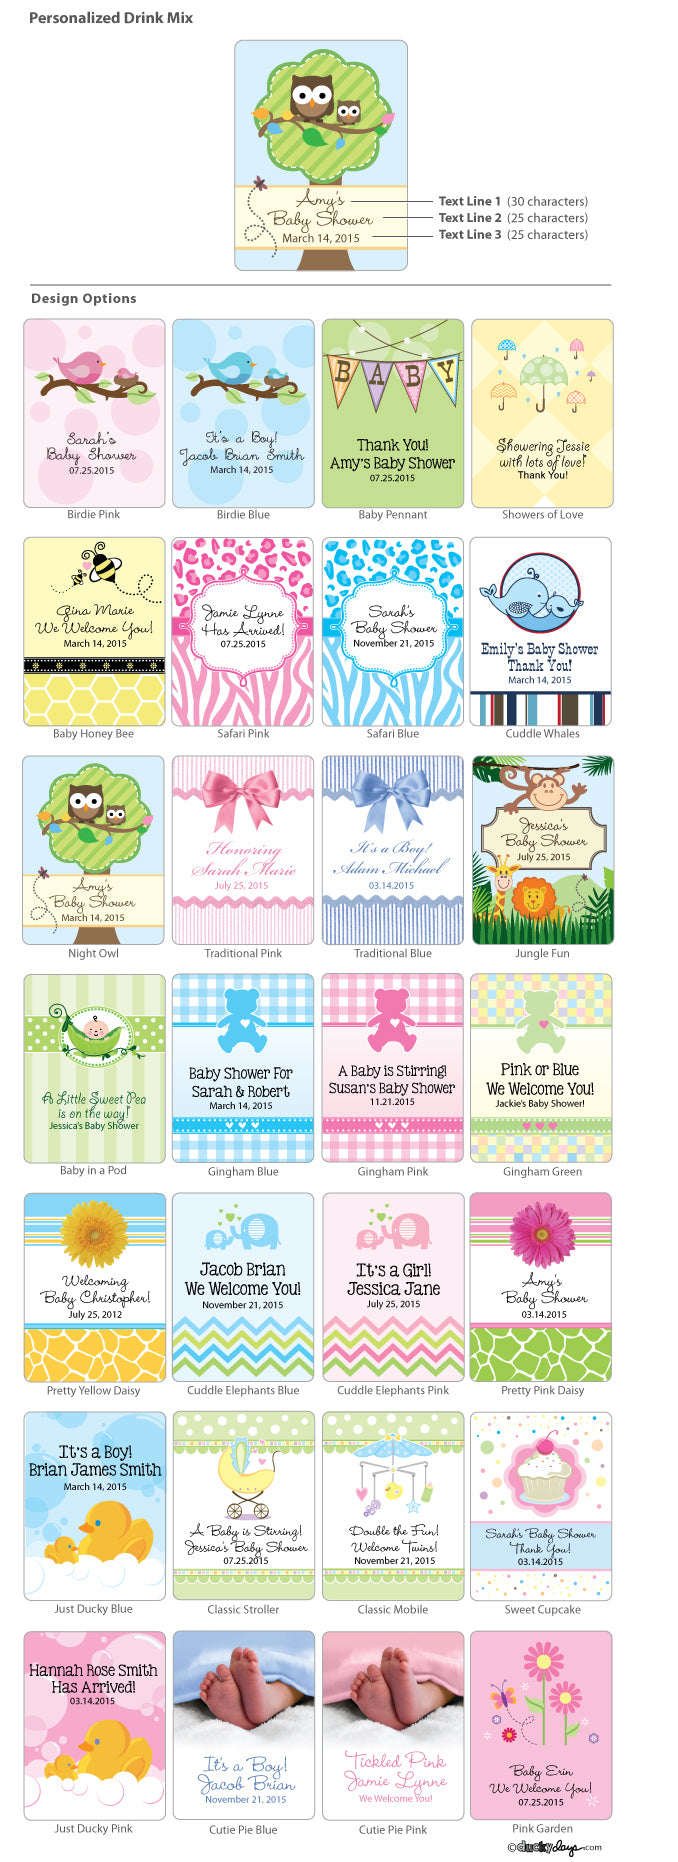 Personalized Baby Cocoa Favors (Many Designs Available) - Alternate Image 2 | My Wedding Favors